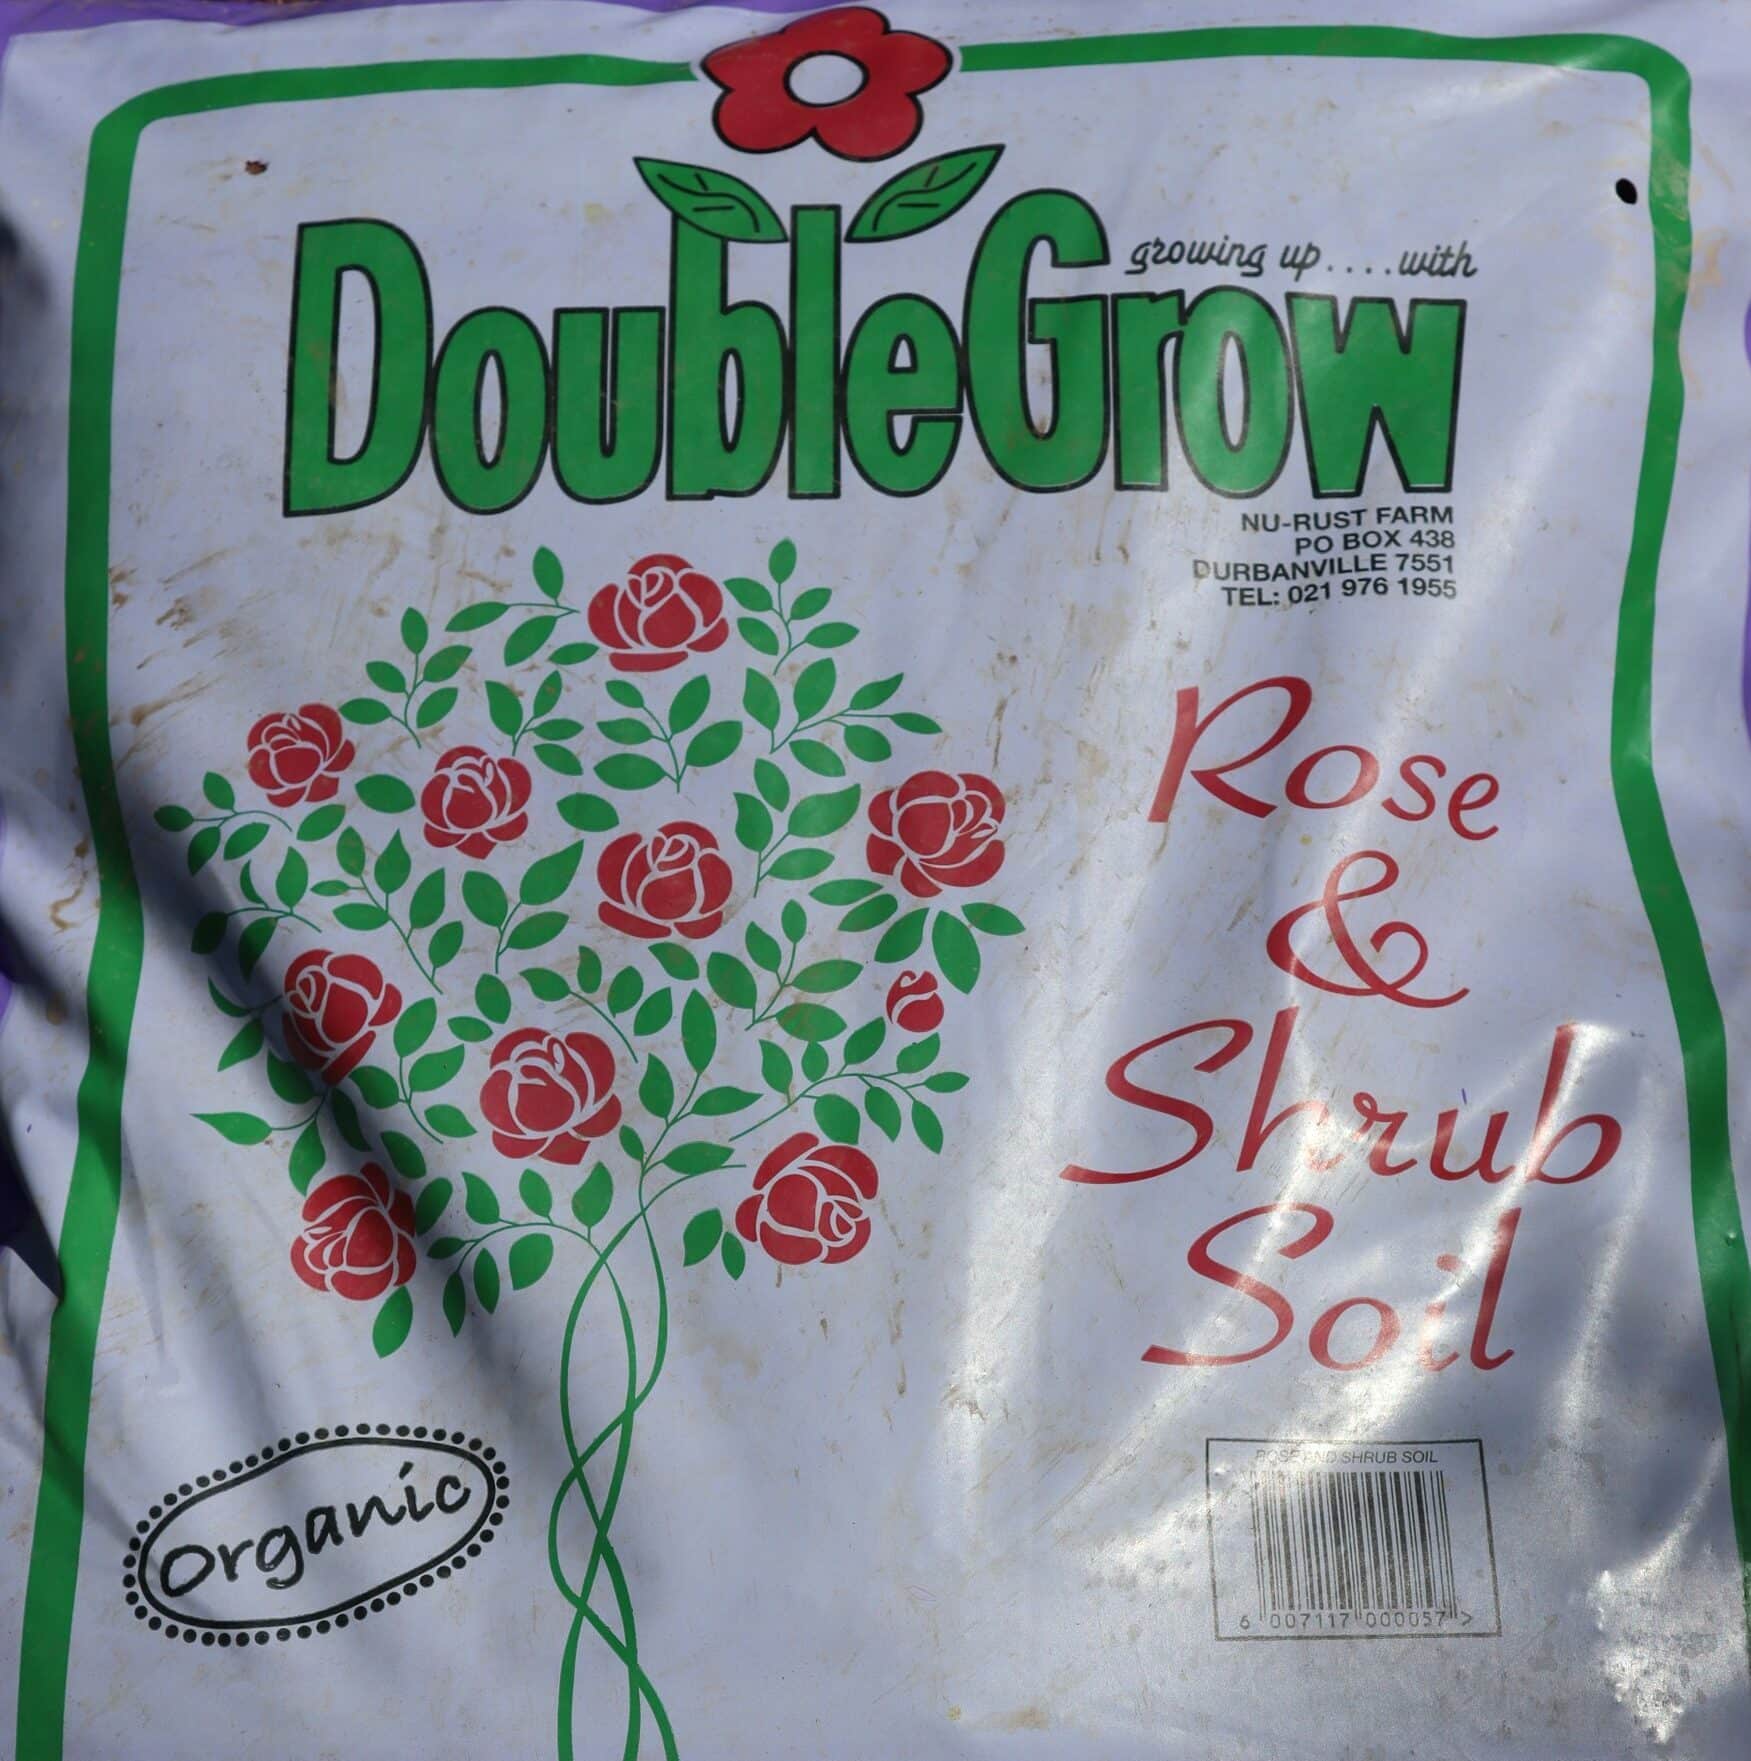 A 30DM bag of Double Grow rose and shrub soil mix.